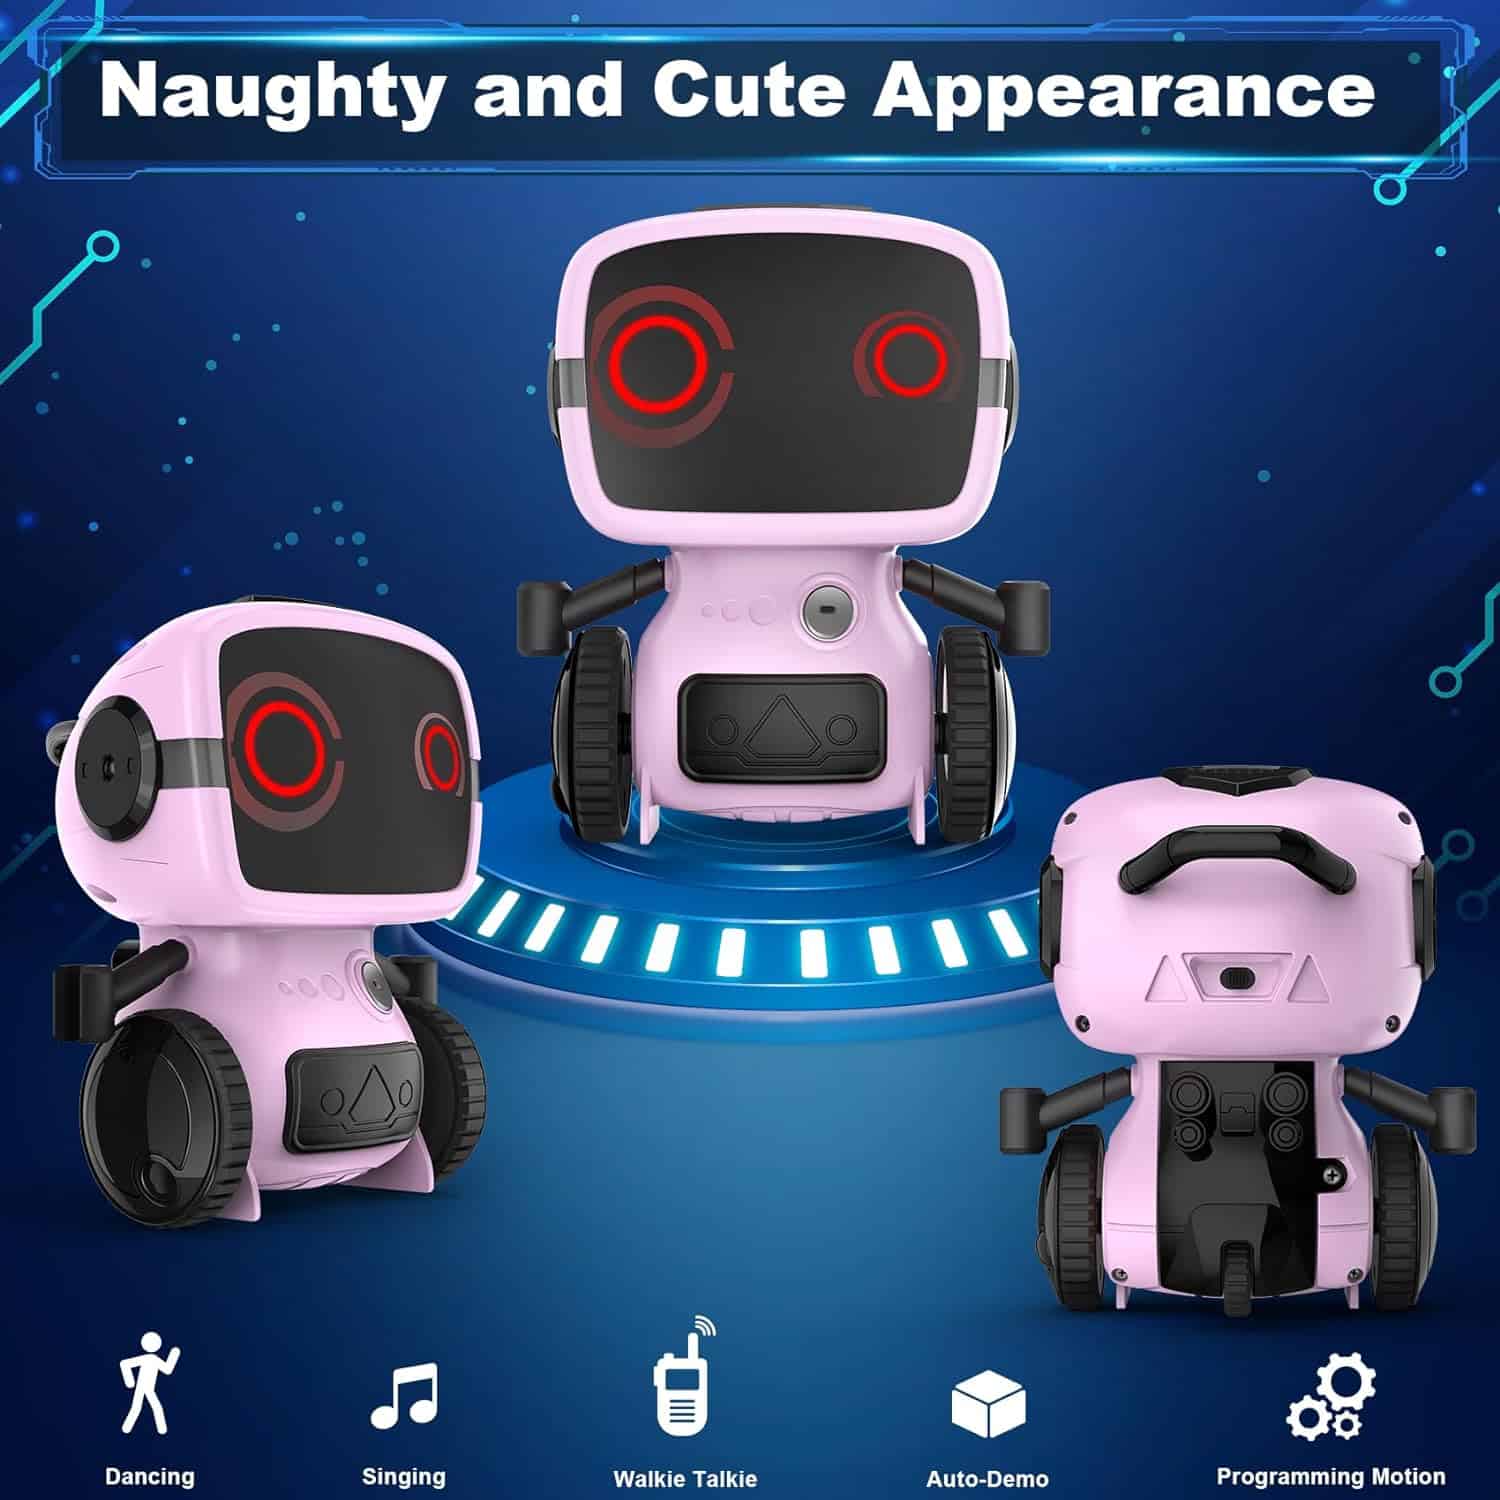 Dandist Robot Toys for Girls: A Fun and Educational Review